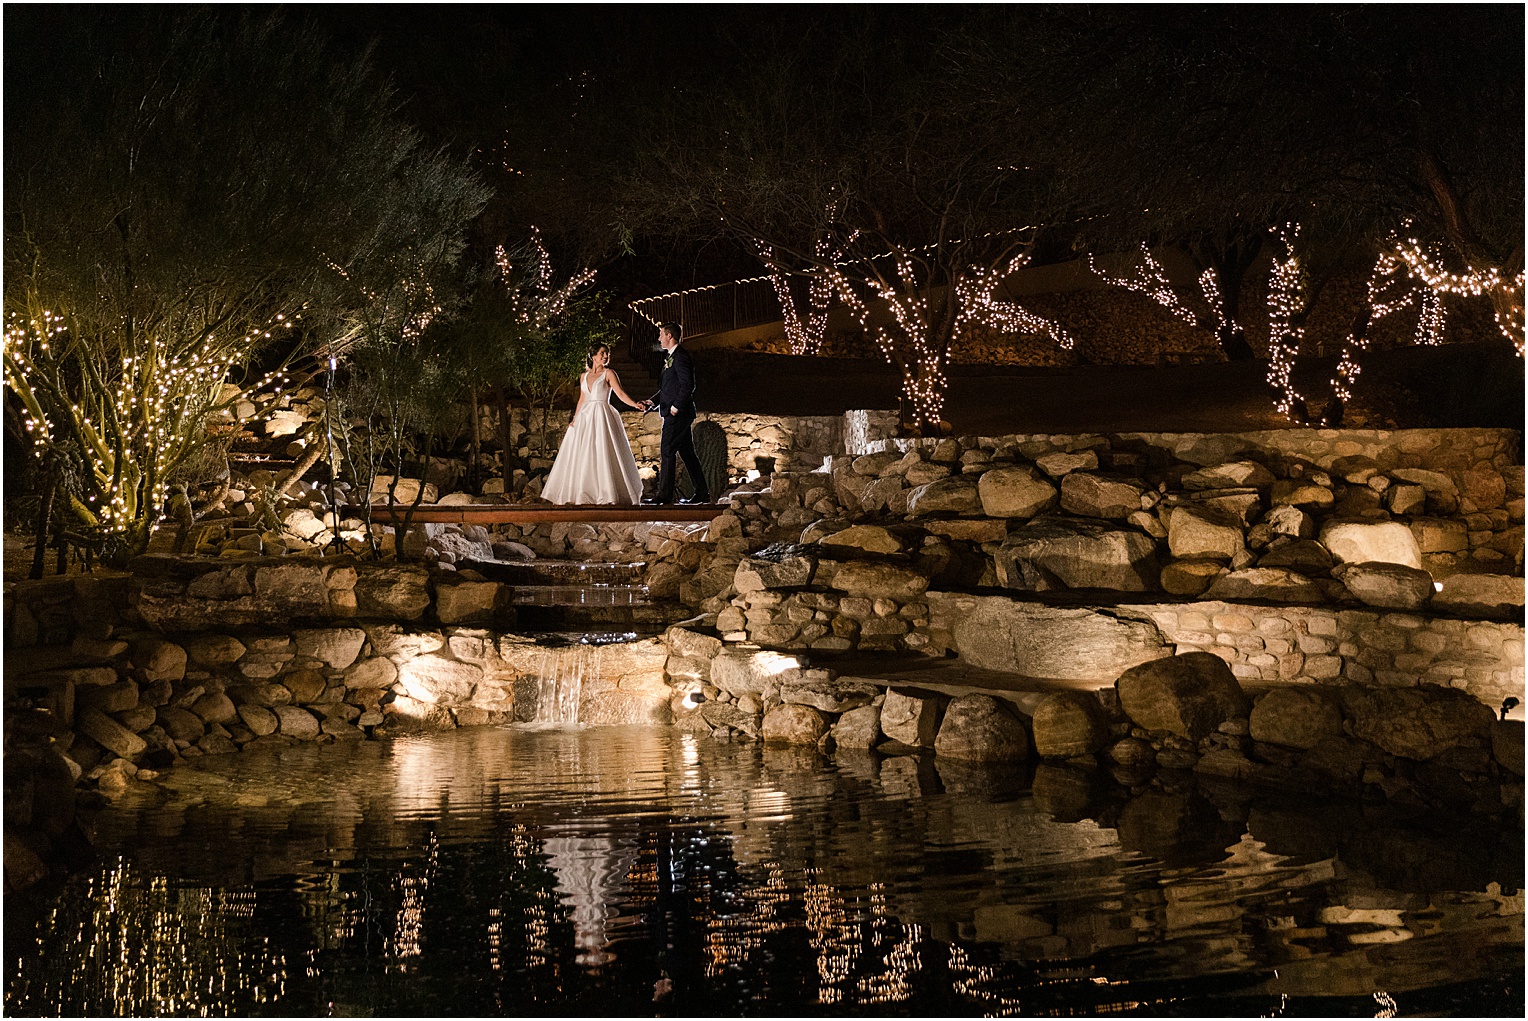 Saguaro Buttes Wedding Tucson, Arizona Farnaz & Brian romantic nighttime bride and groom photos by twinkle light in the garden